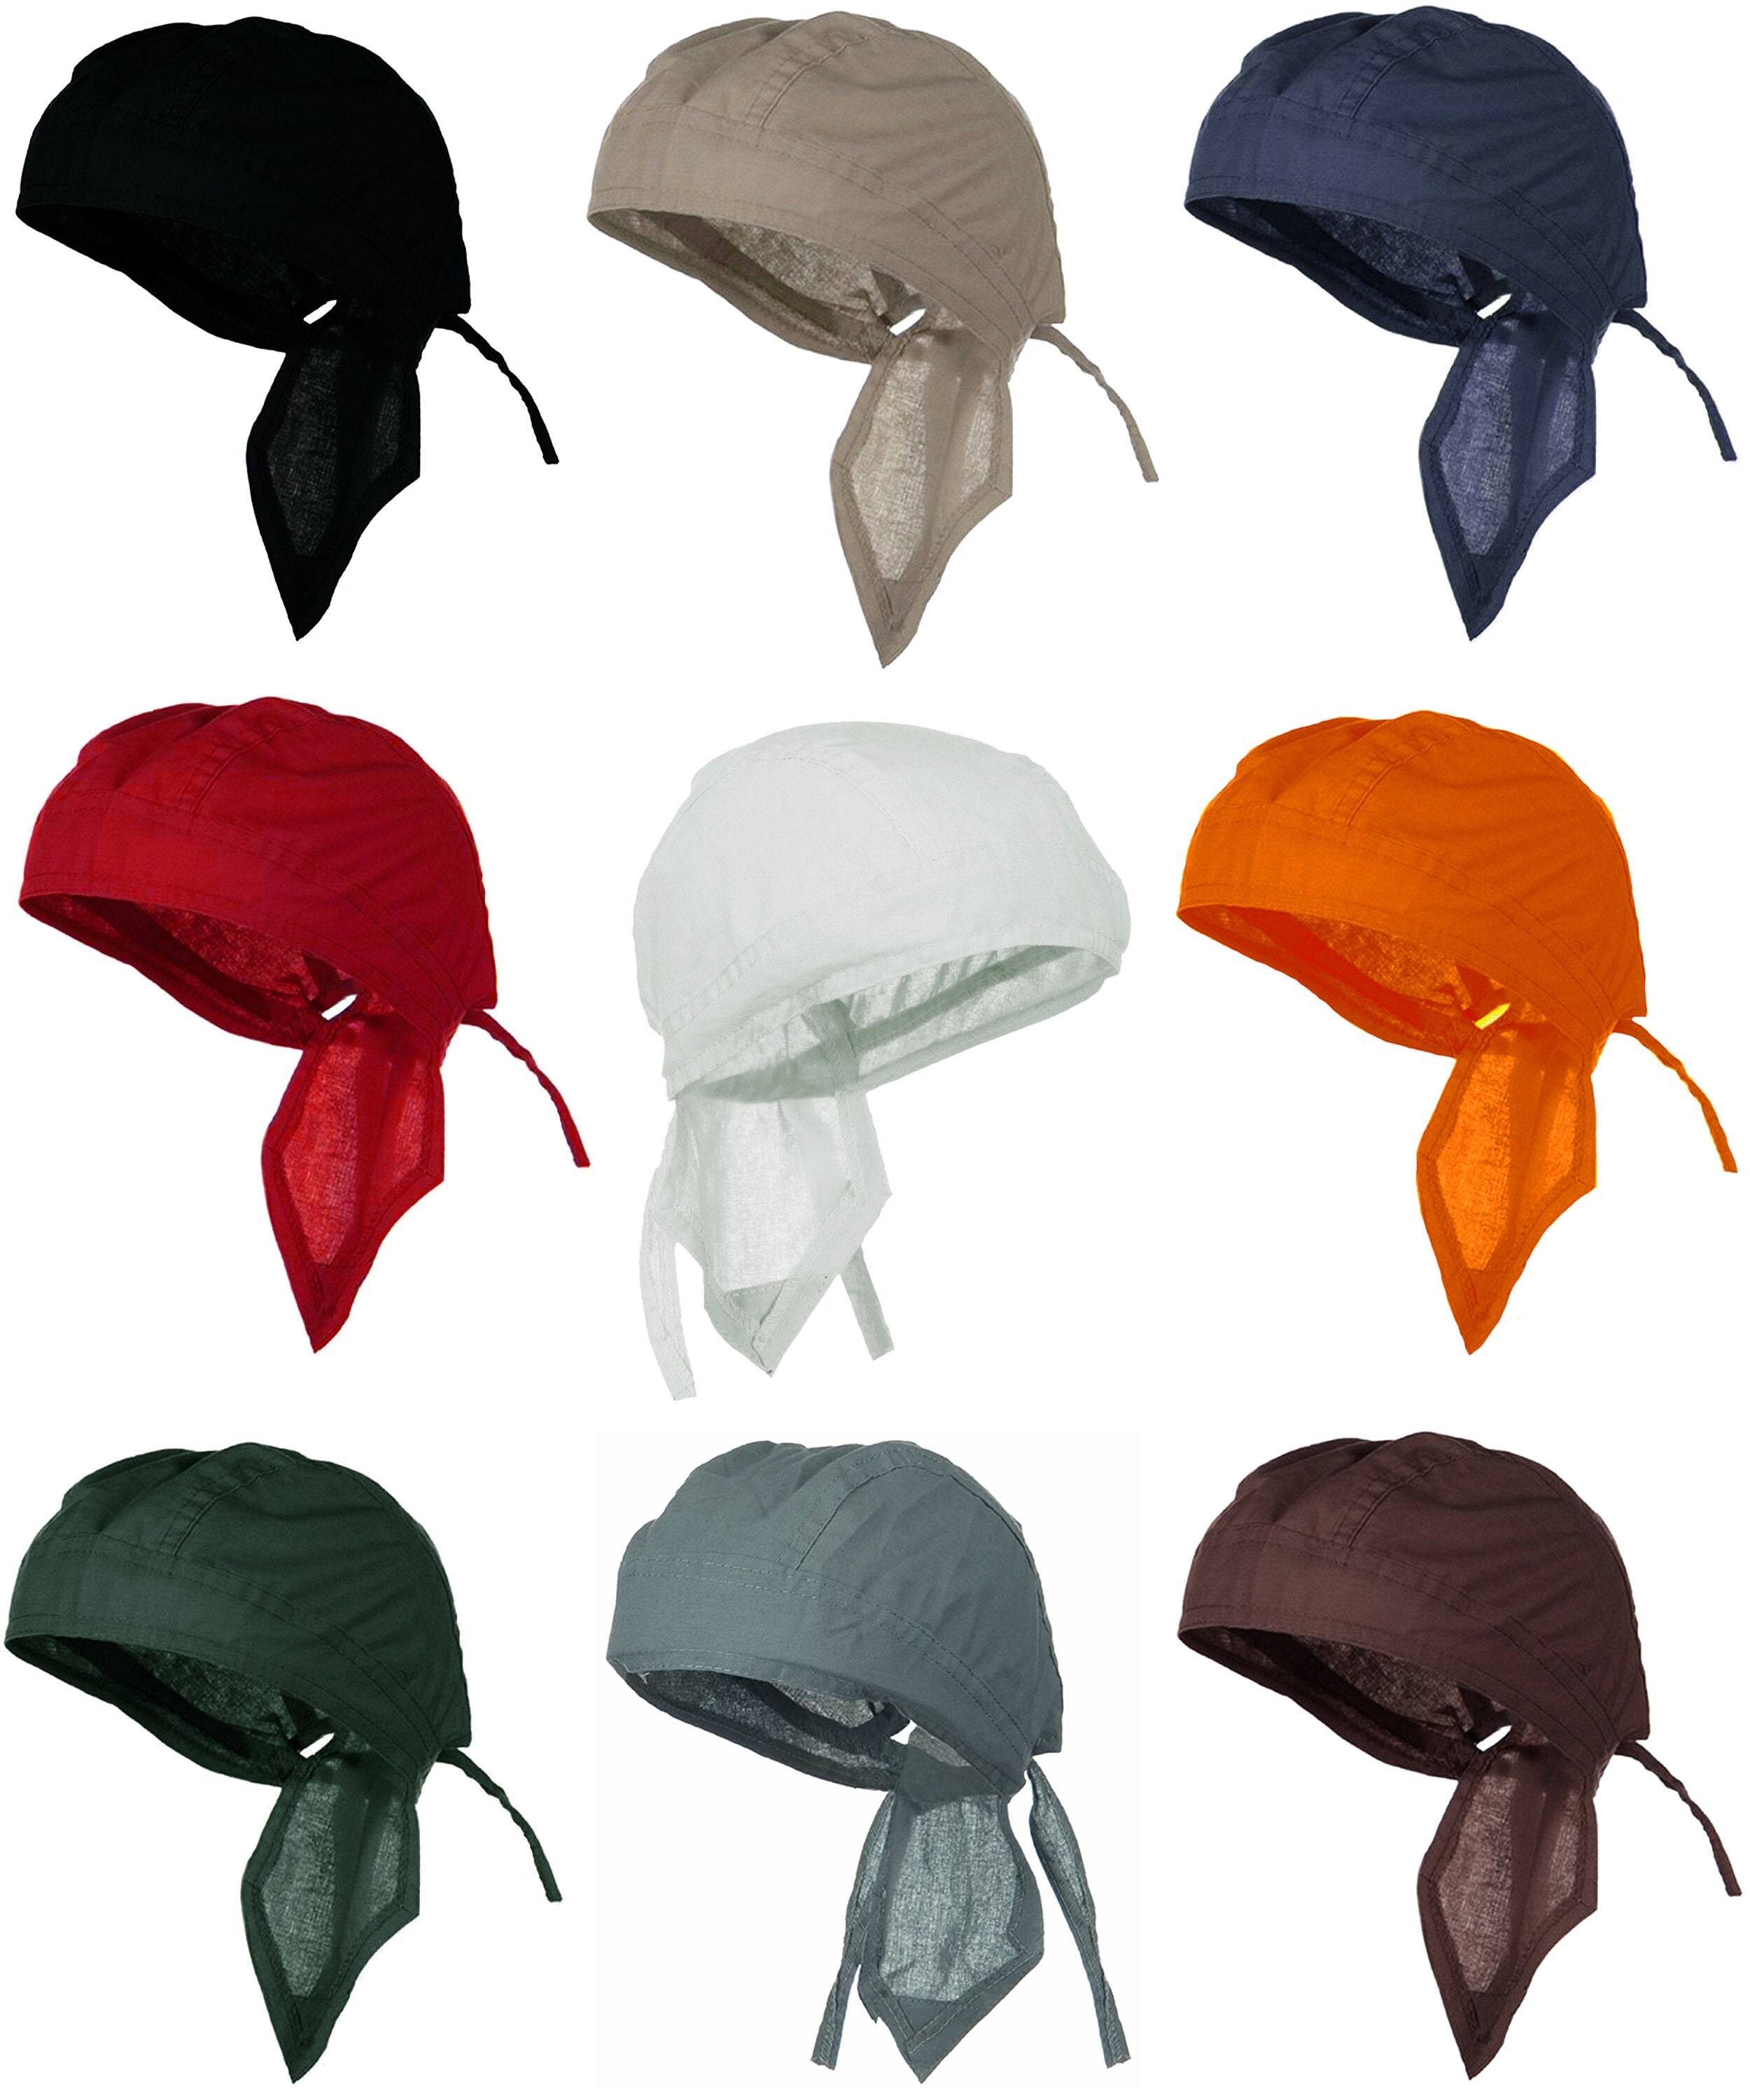 Great Vibes Silky Durags In 3 Colors - Great Vibes Barbershop